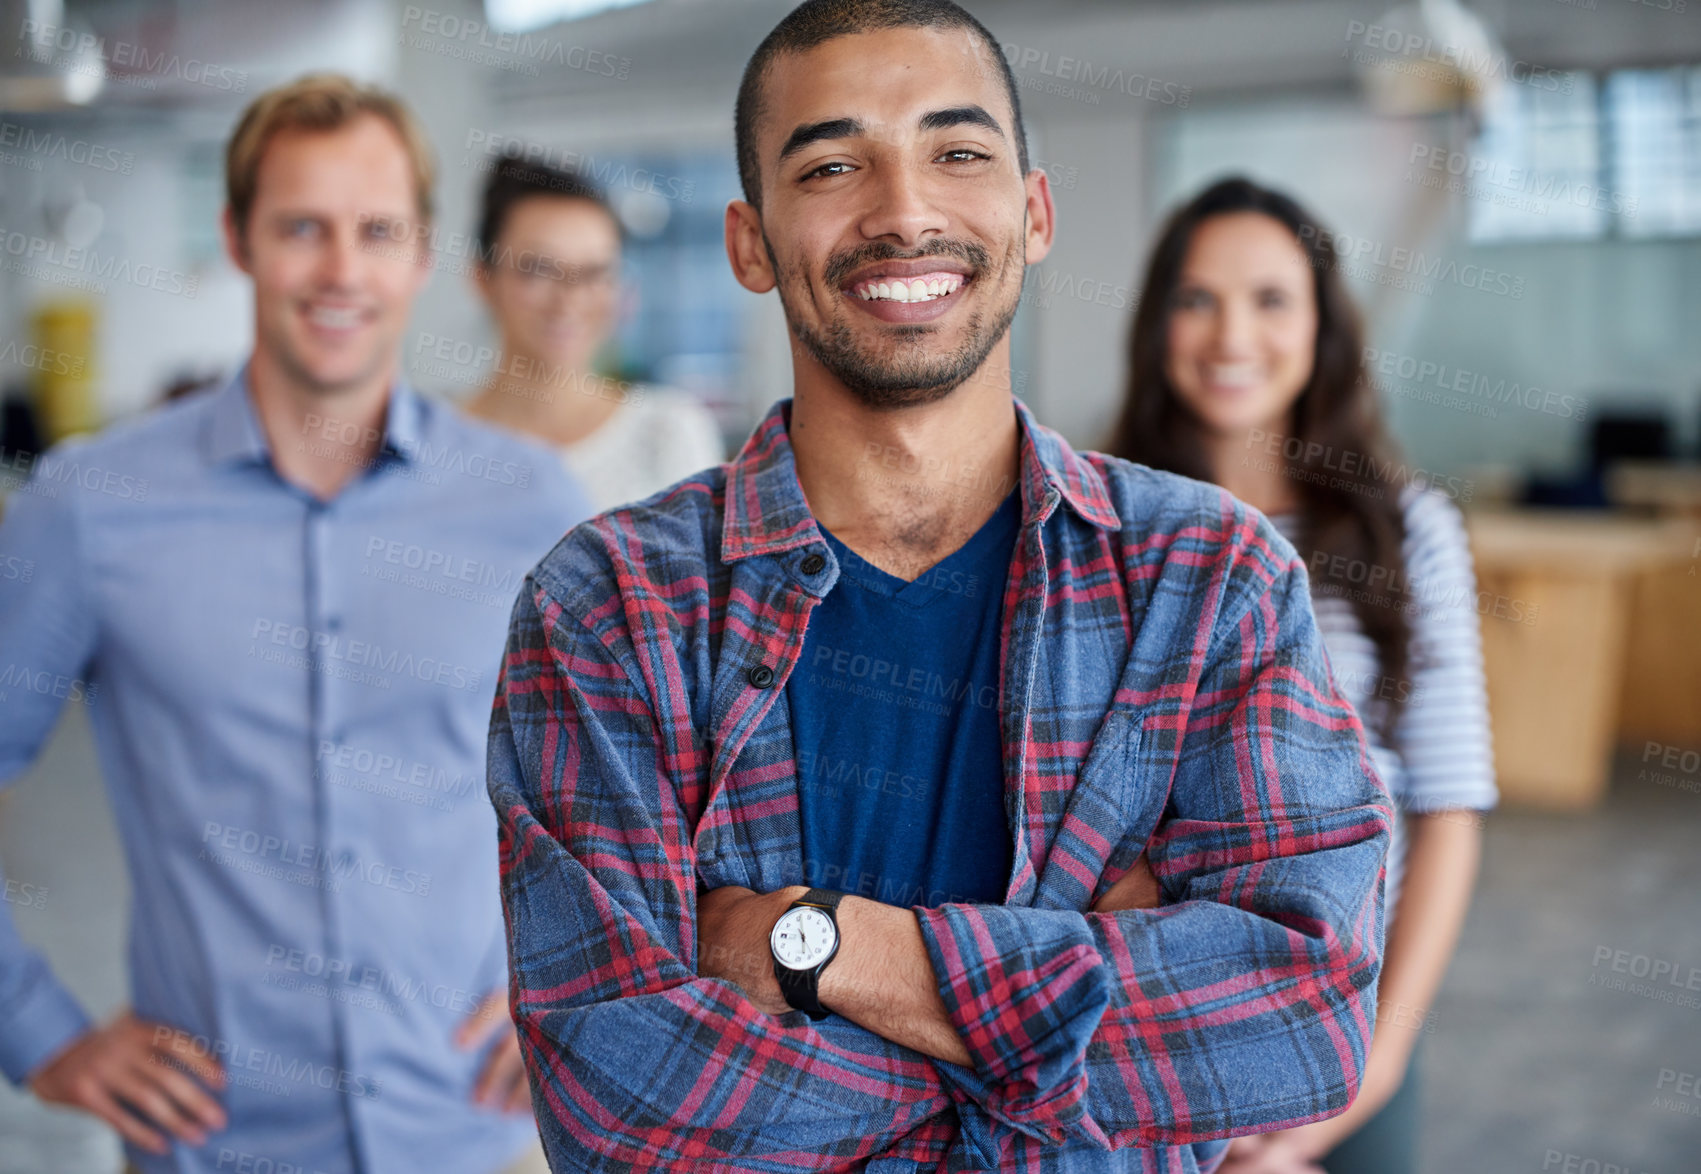 Buy stock photo Confidently smiling young man with his coworkers smiling behind him